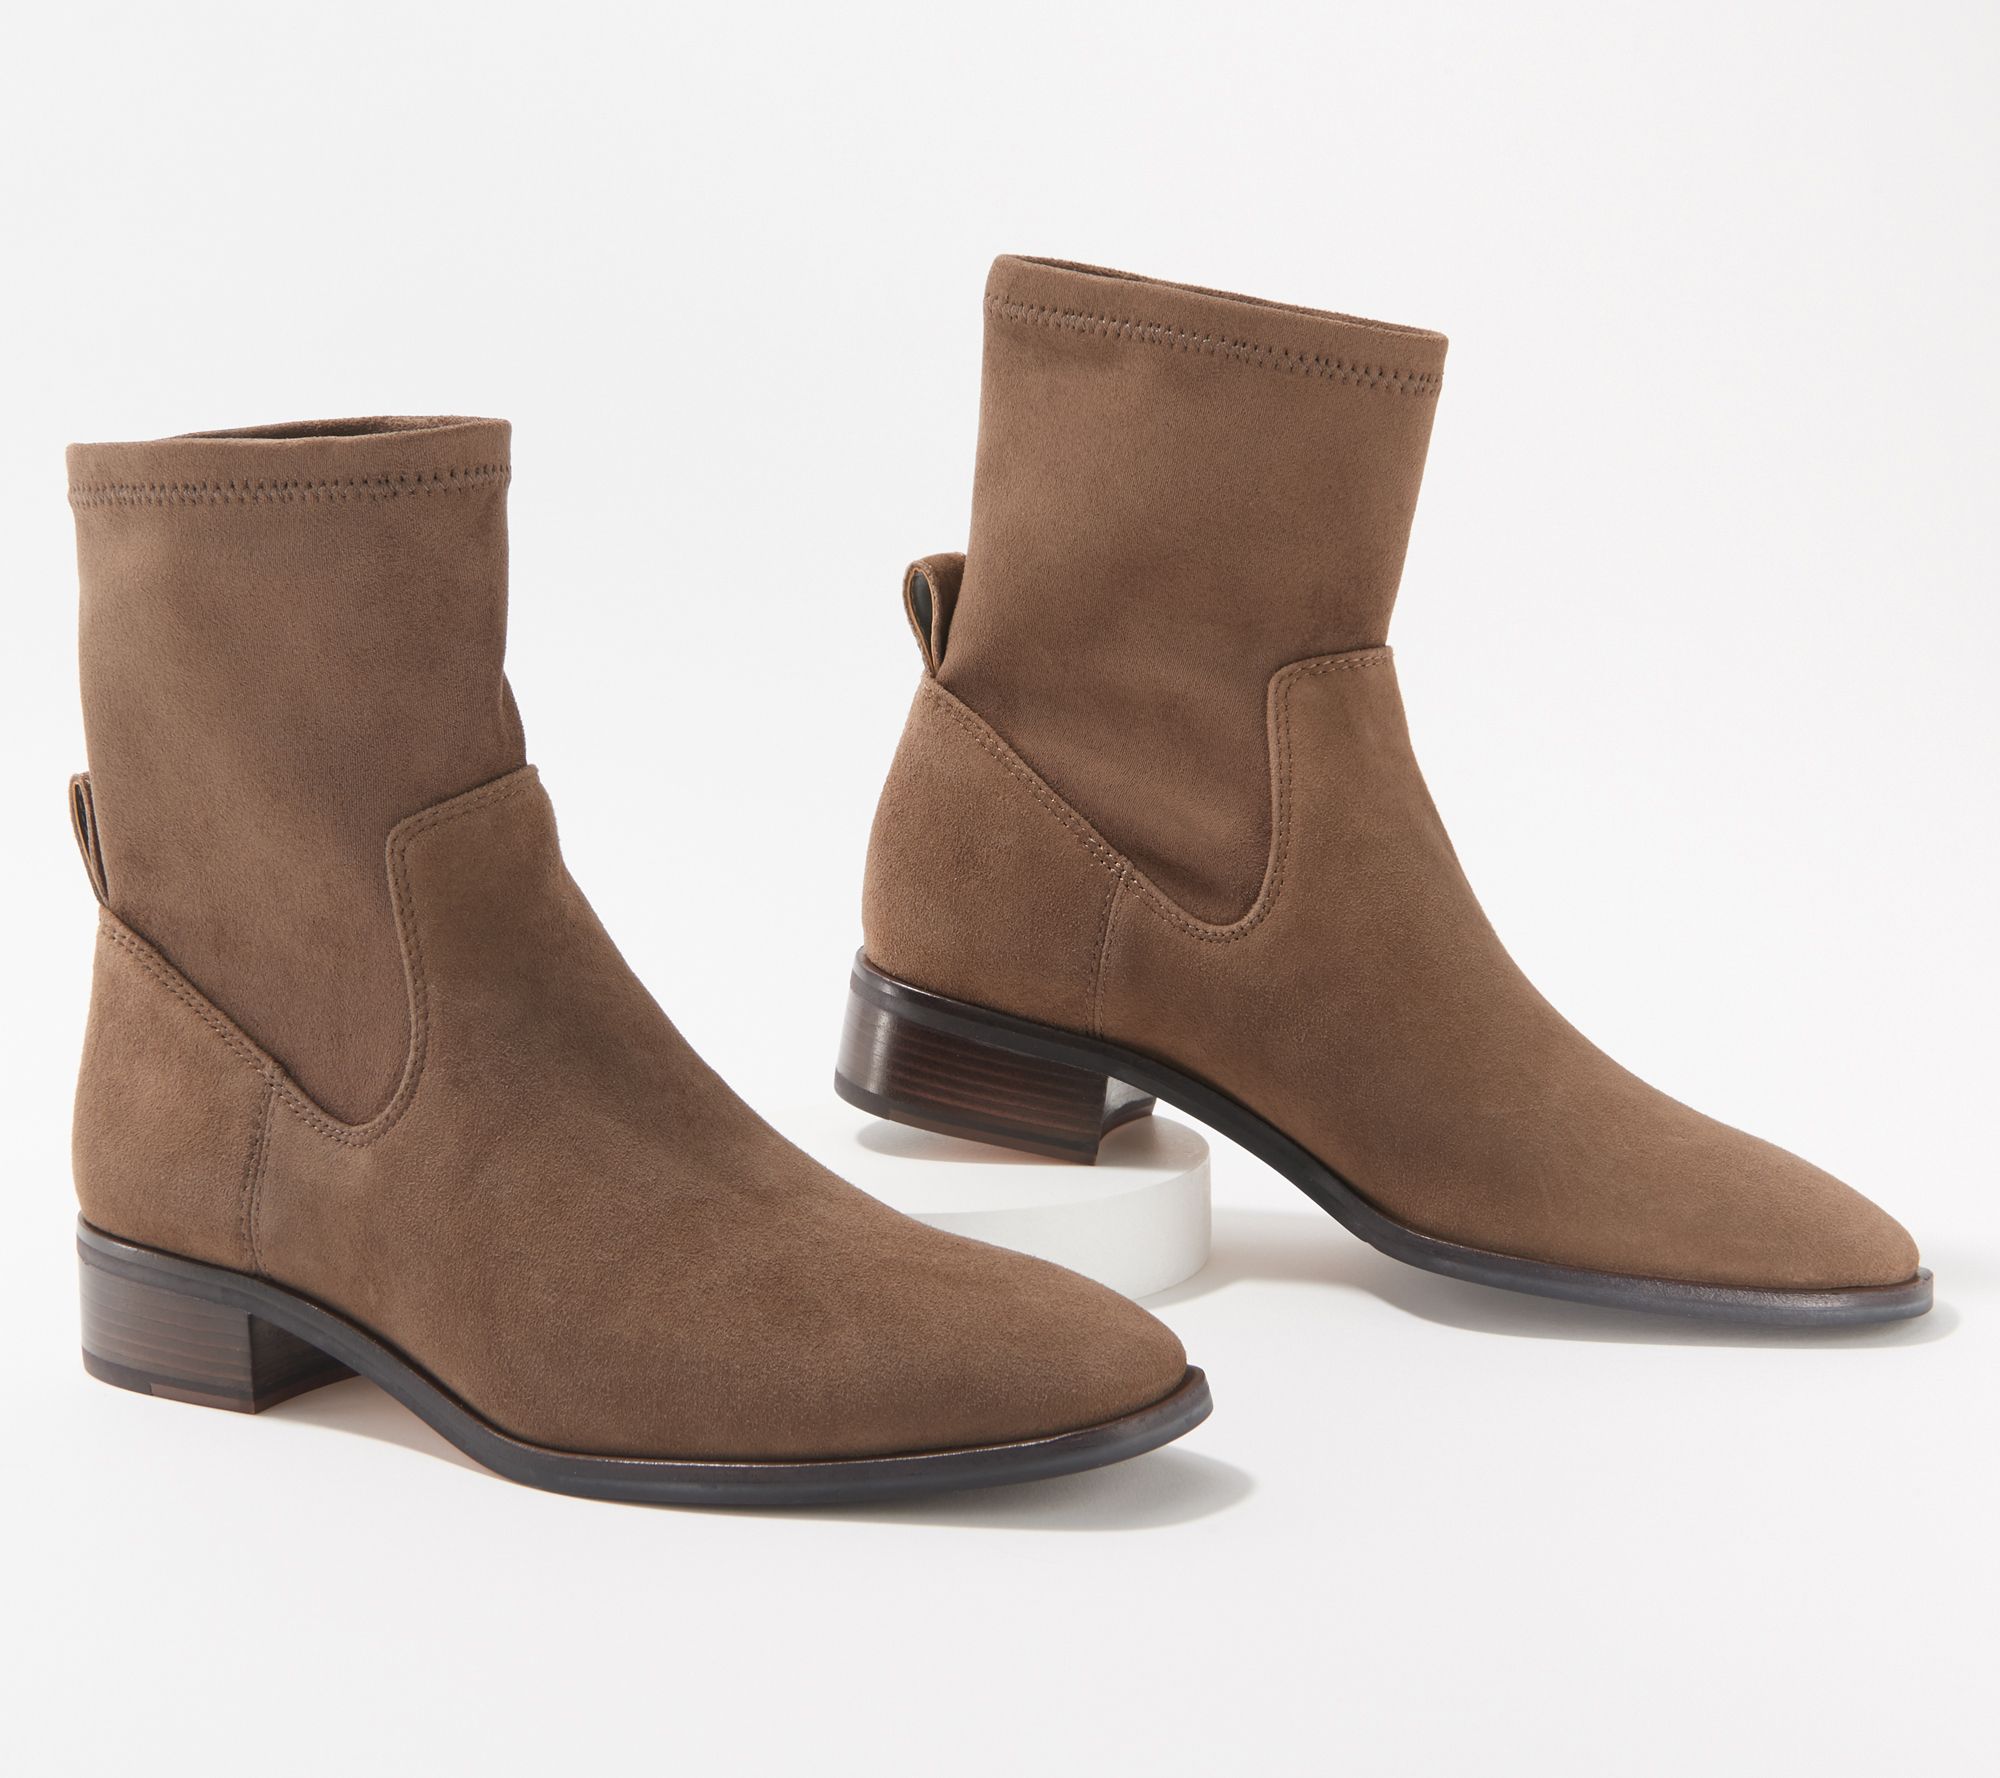 Louise et Cie - The perfect bootie to last you all season long